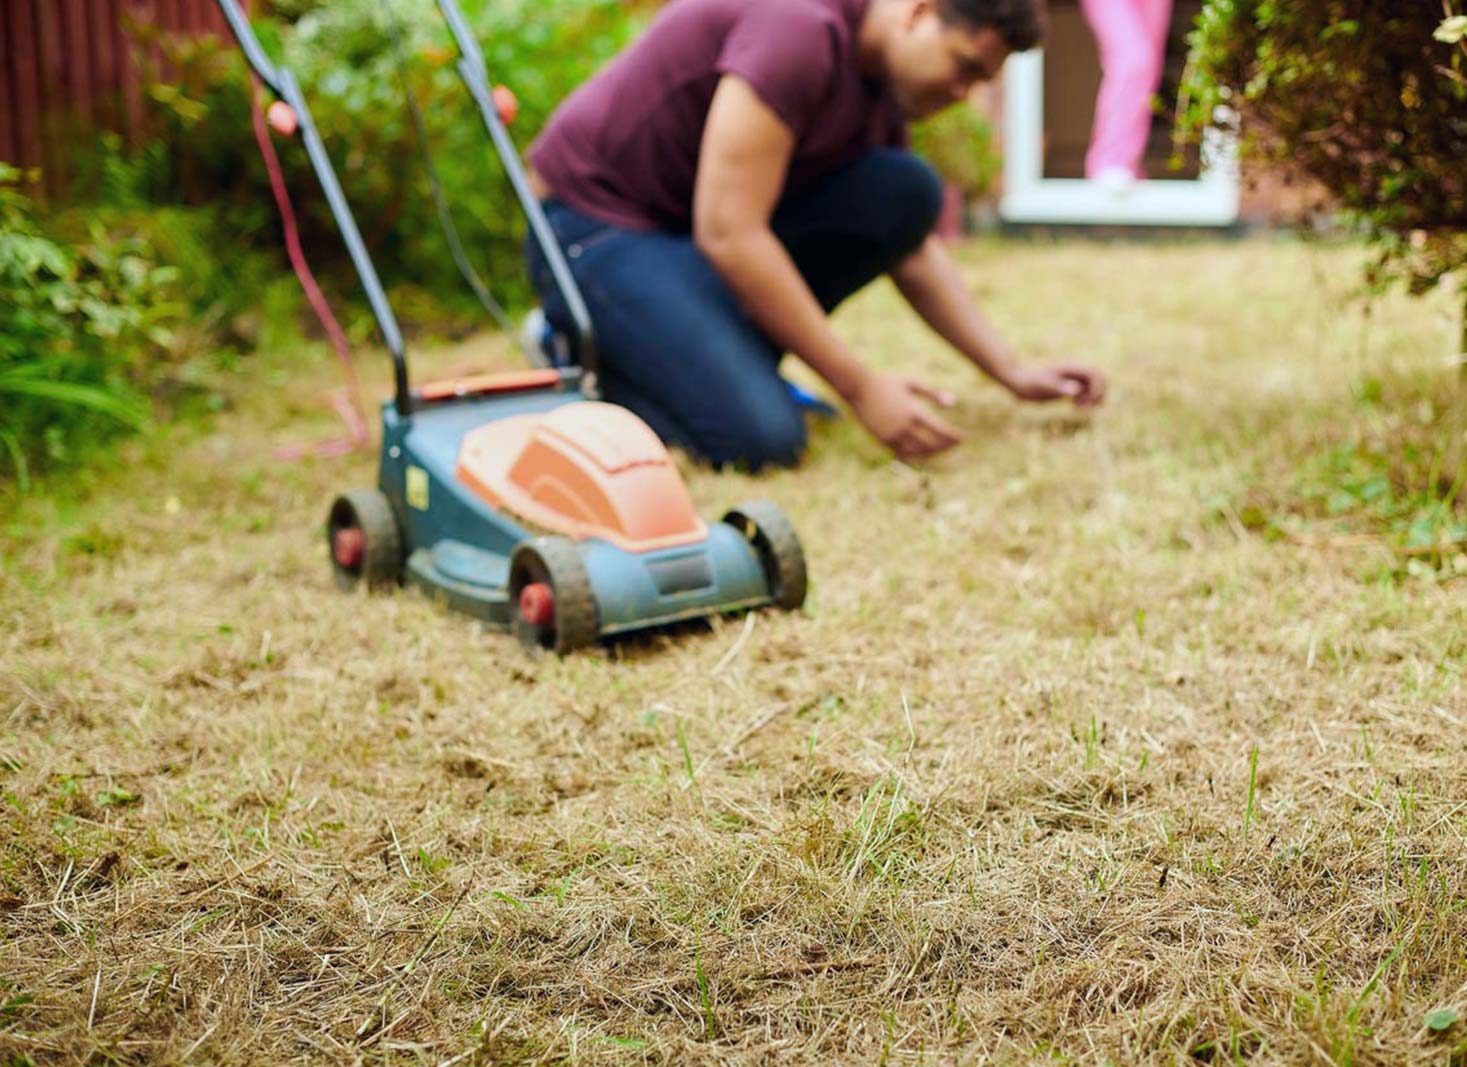 Caring for your lawn during extreme temperatures